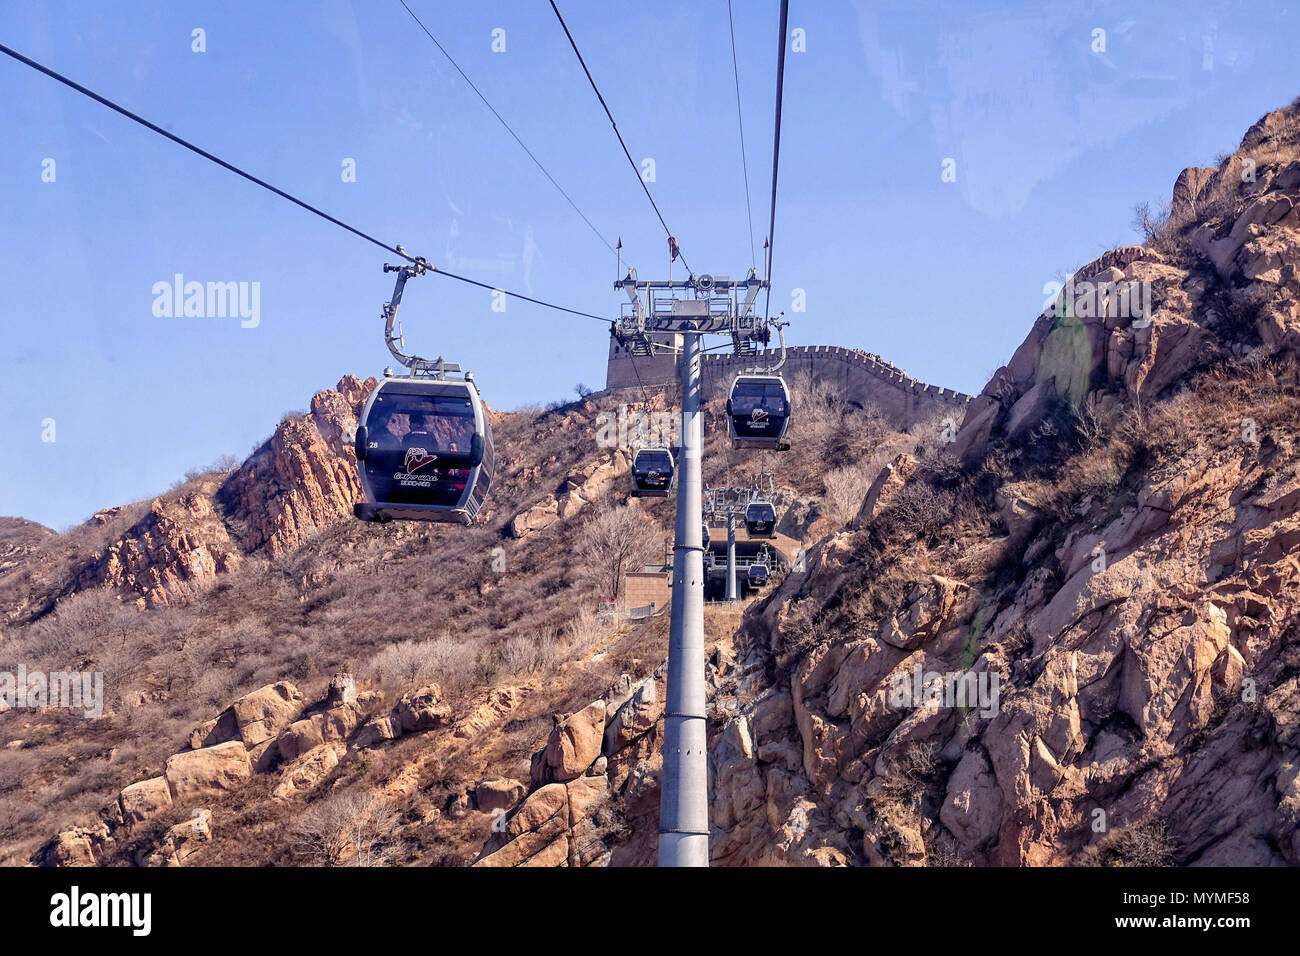 BADALING, CHINA - MARCH 13, 2016: Great Wall of China. A cable car taking  visitors up to the Great Wall of China Stock Photo - Alamy